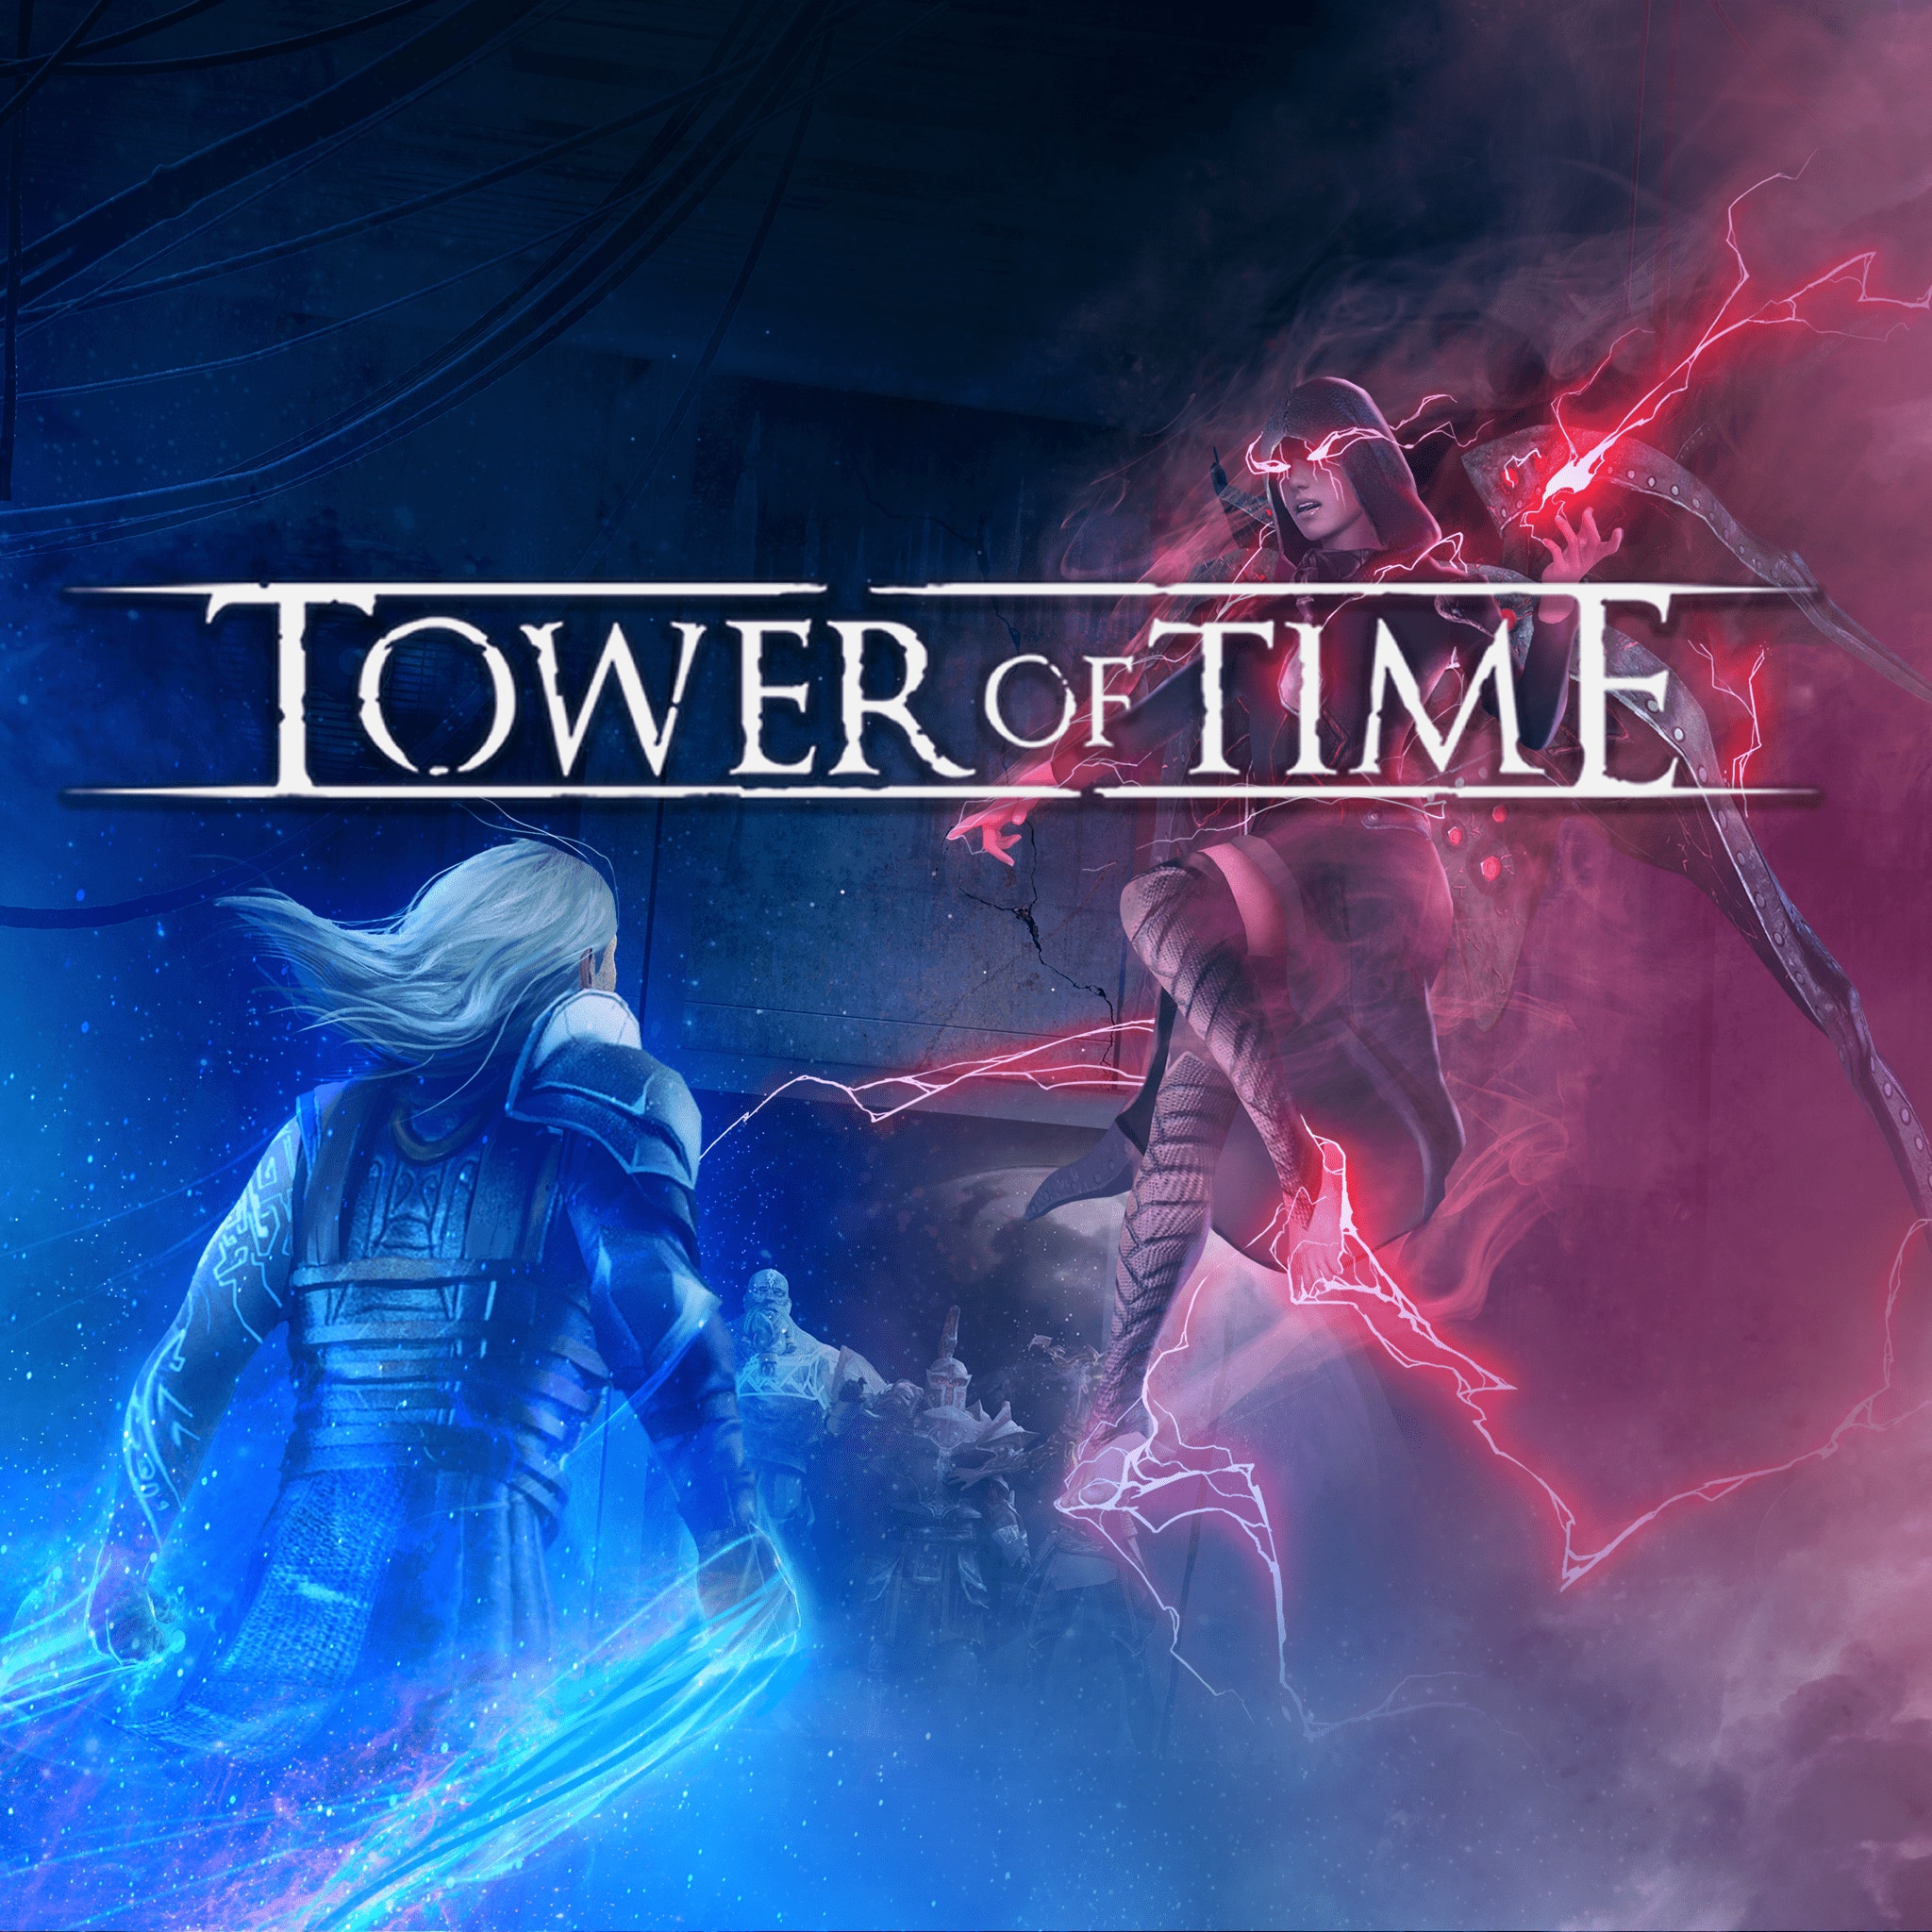 Steam tower of time фото 3